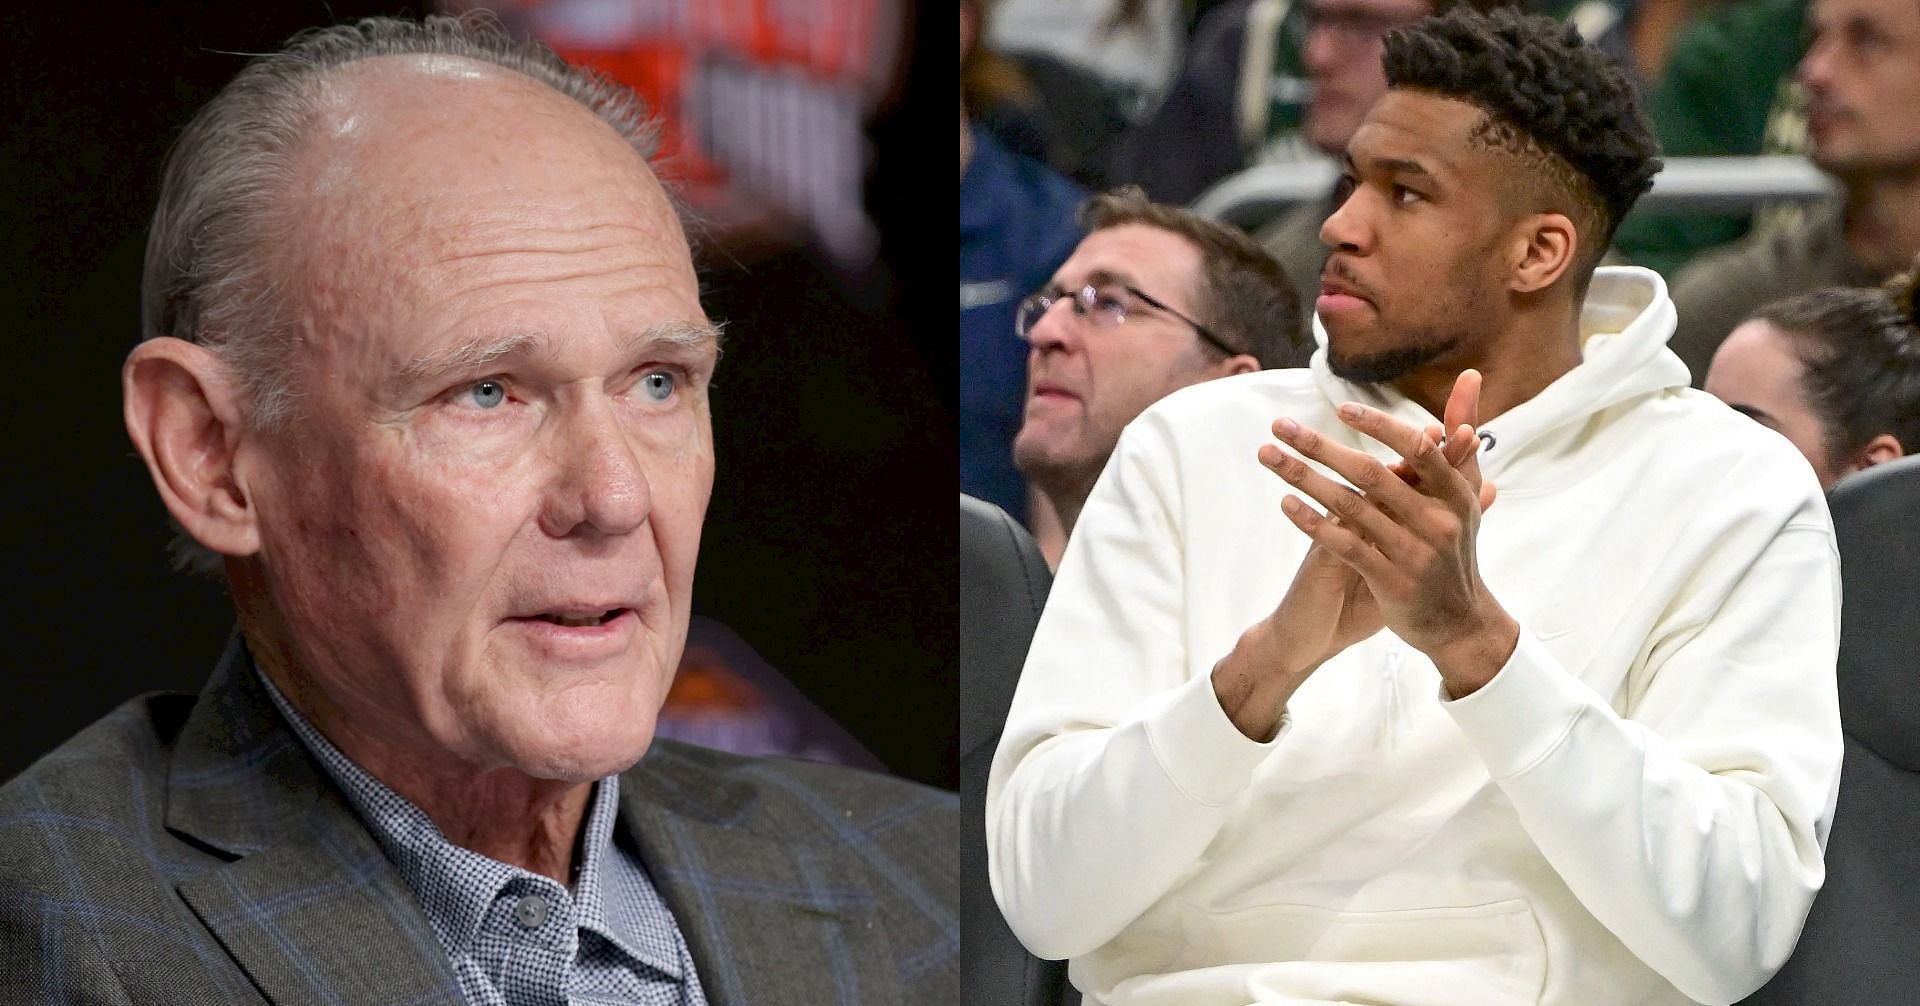 Hall of Fame coach George Karl trashes notion of Giannis Antetokounmpo